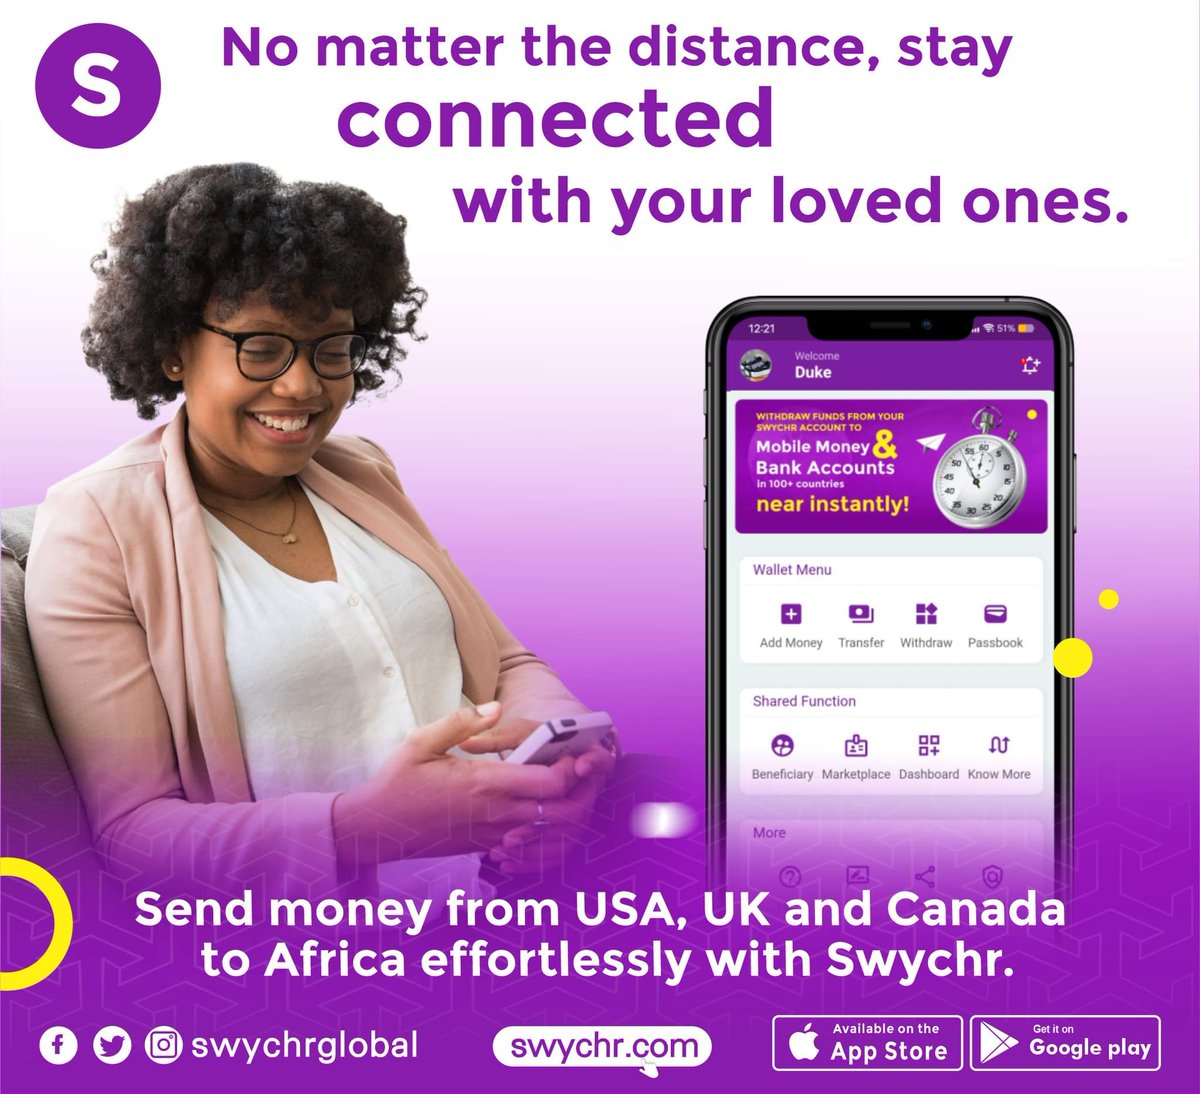 Enjoy cross-border payments with SwyChr.

Download SwyChr from Google play Store 🔗 play.google.com/store/apps/det…

Download SwyChr from App store 🔗 apps.apple.com/ae/app/jtq-wal…
.
.
.
#swychrcares #financialliteracy #swychr #fintechapp #fintechstartup #moneytransfer #remittances